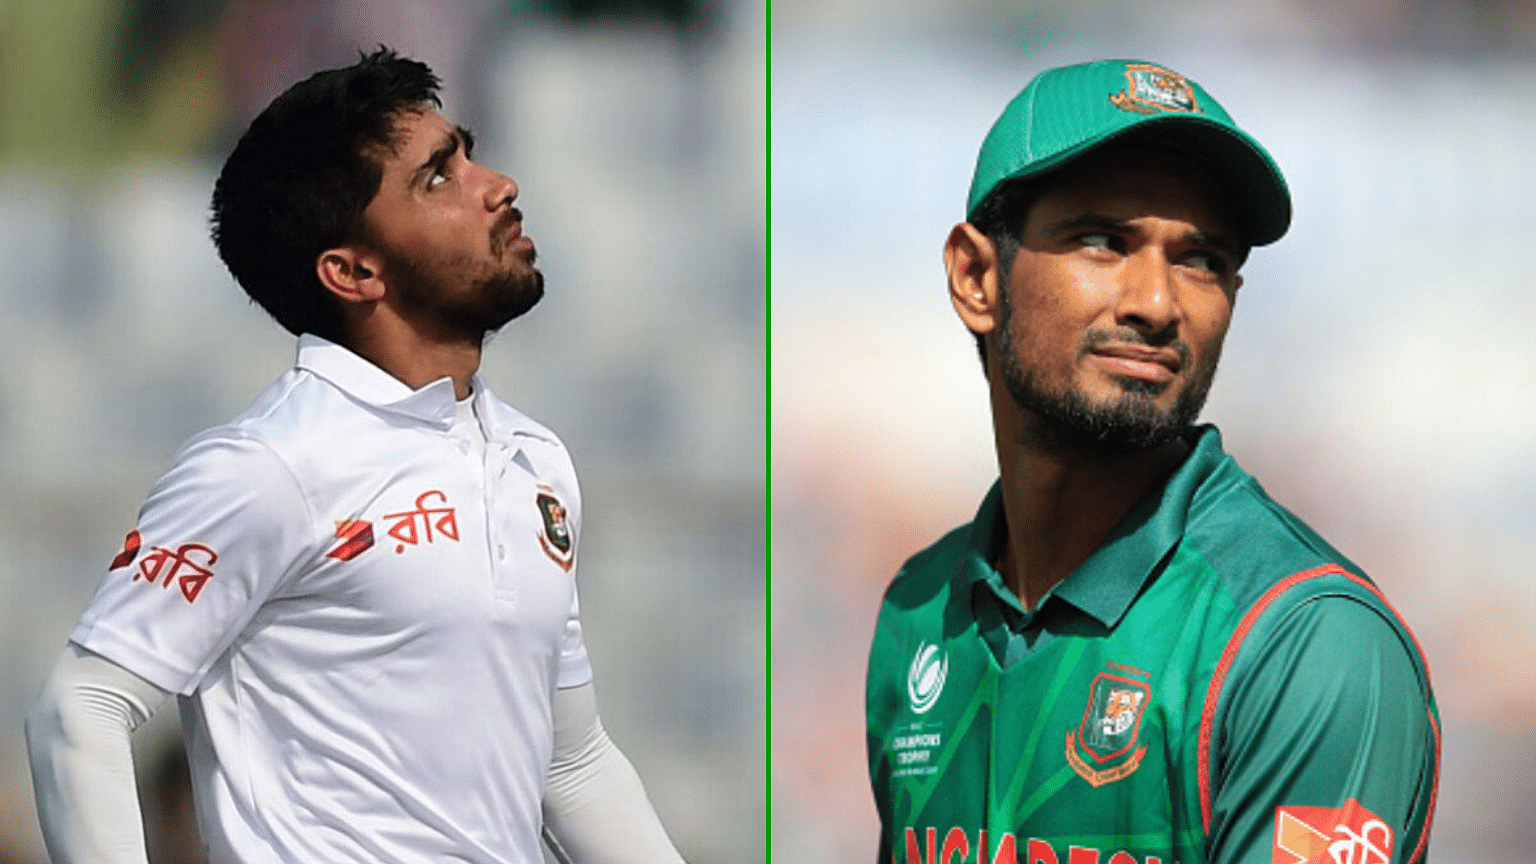 Mahmdullah (right) and Mominul have been named captains after the announcement of Shakib Al Hasan’s 2 year suspension by the ICC.&nbsp;